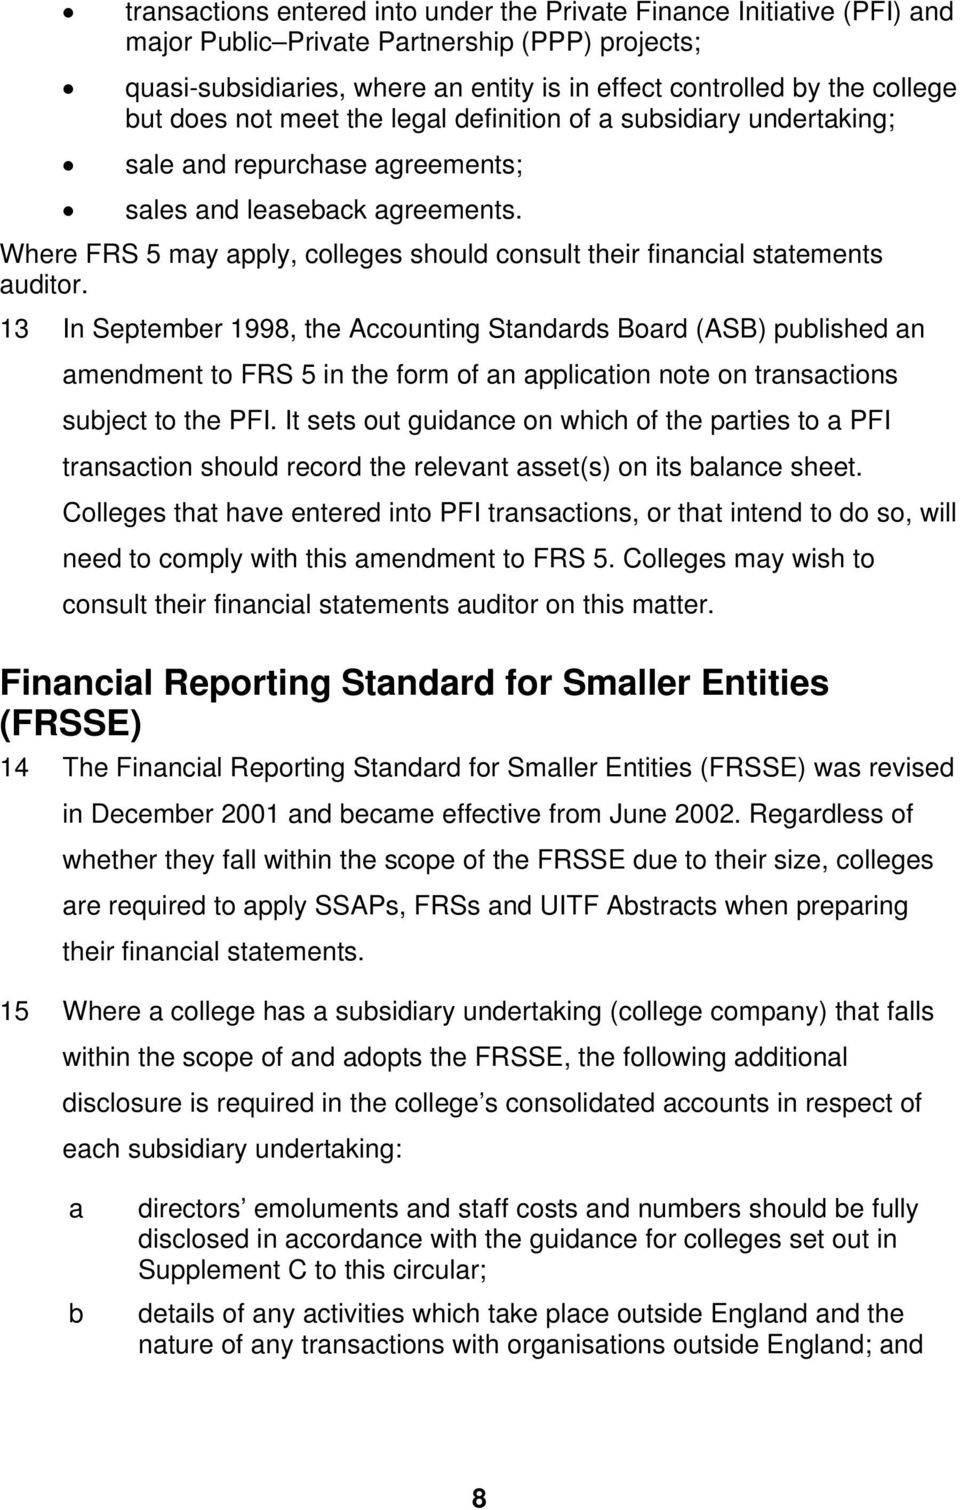 Where FRS 5 may apply, colleges should consult their financial statements auditor.